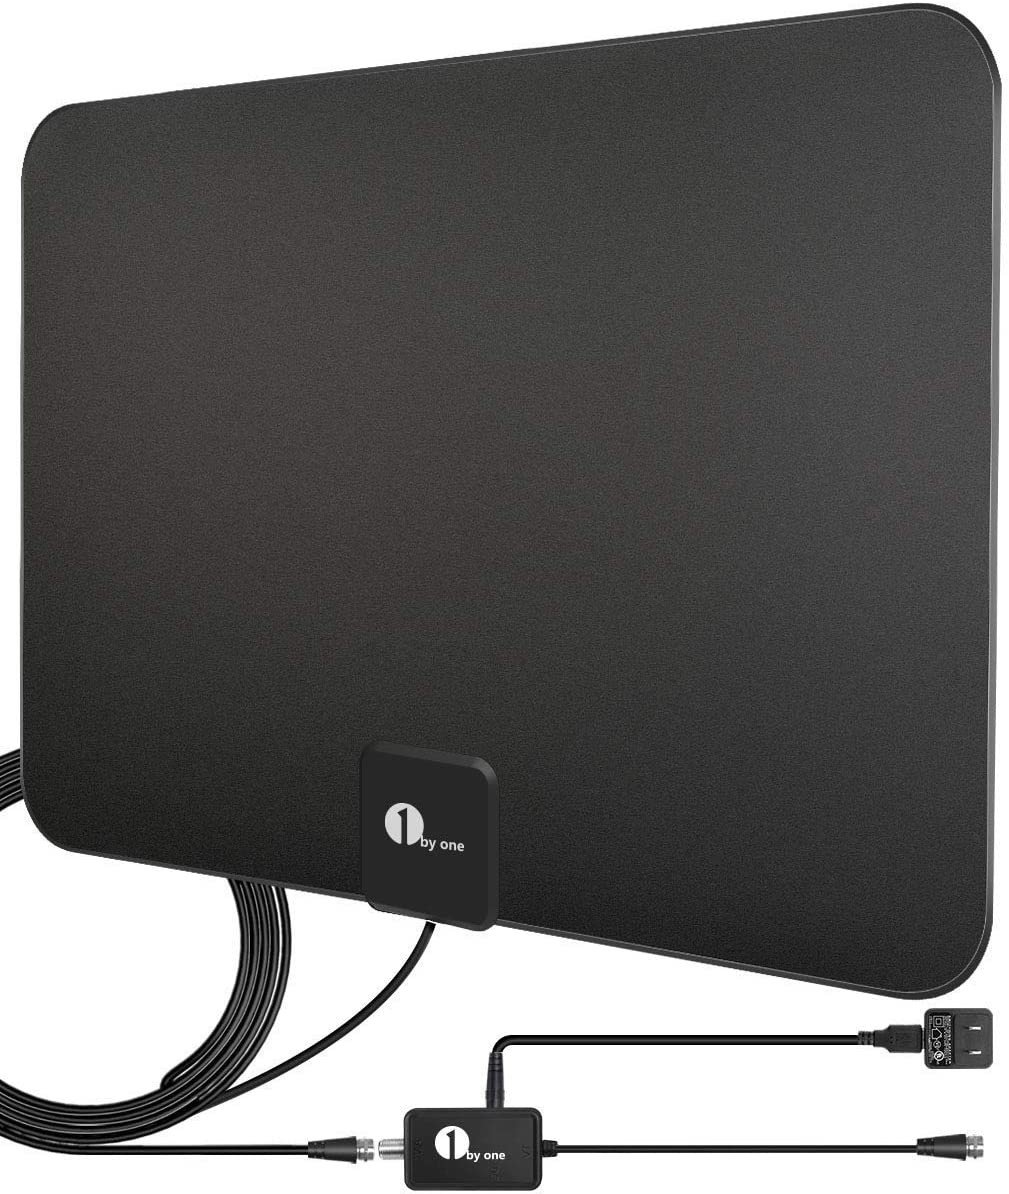 Best Antenna for TV without Cable or Internet 1 BY ONE